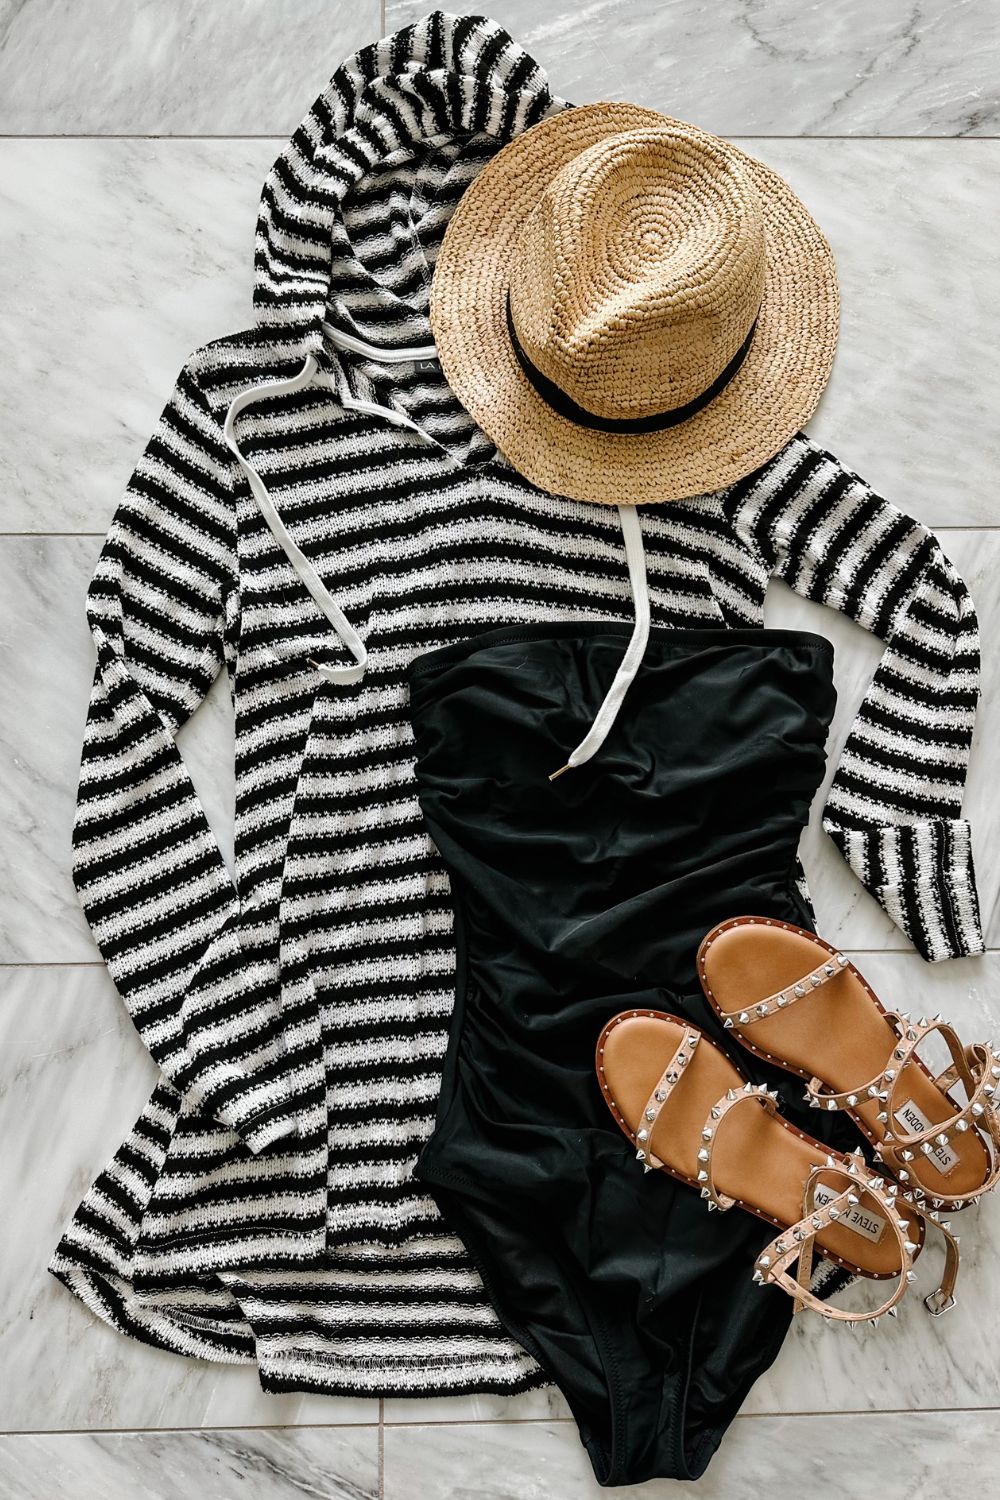 A one piece swimsuit styled with a cover up, sandals, and a straw hat